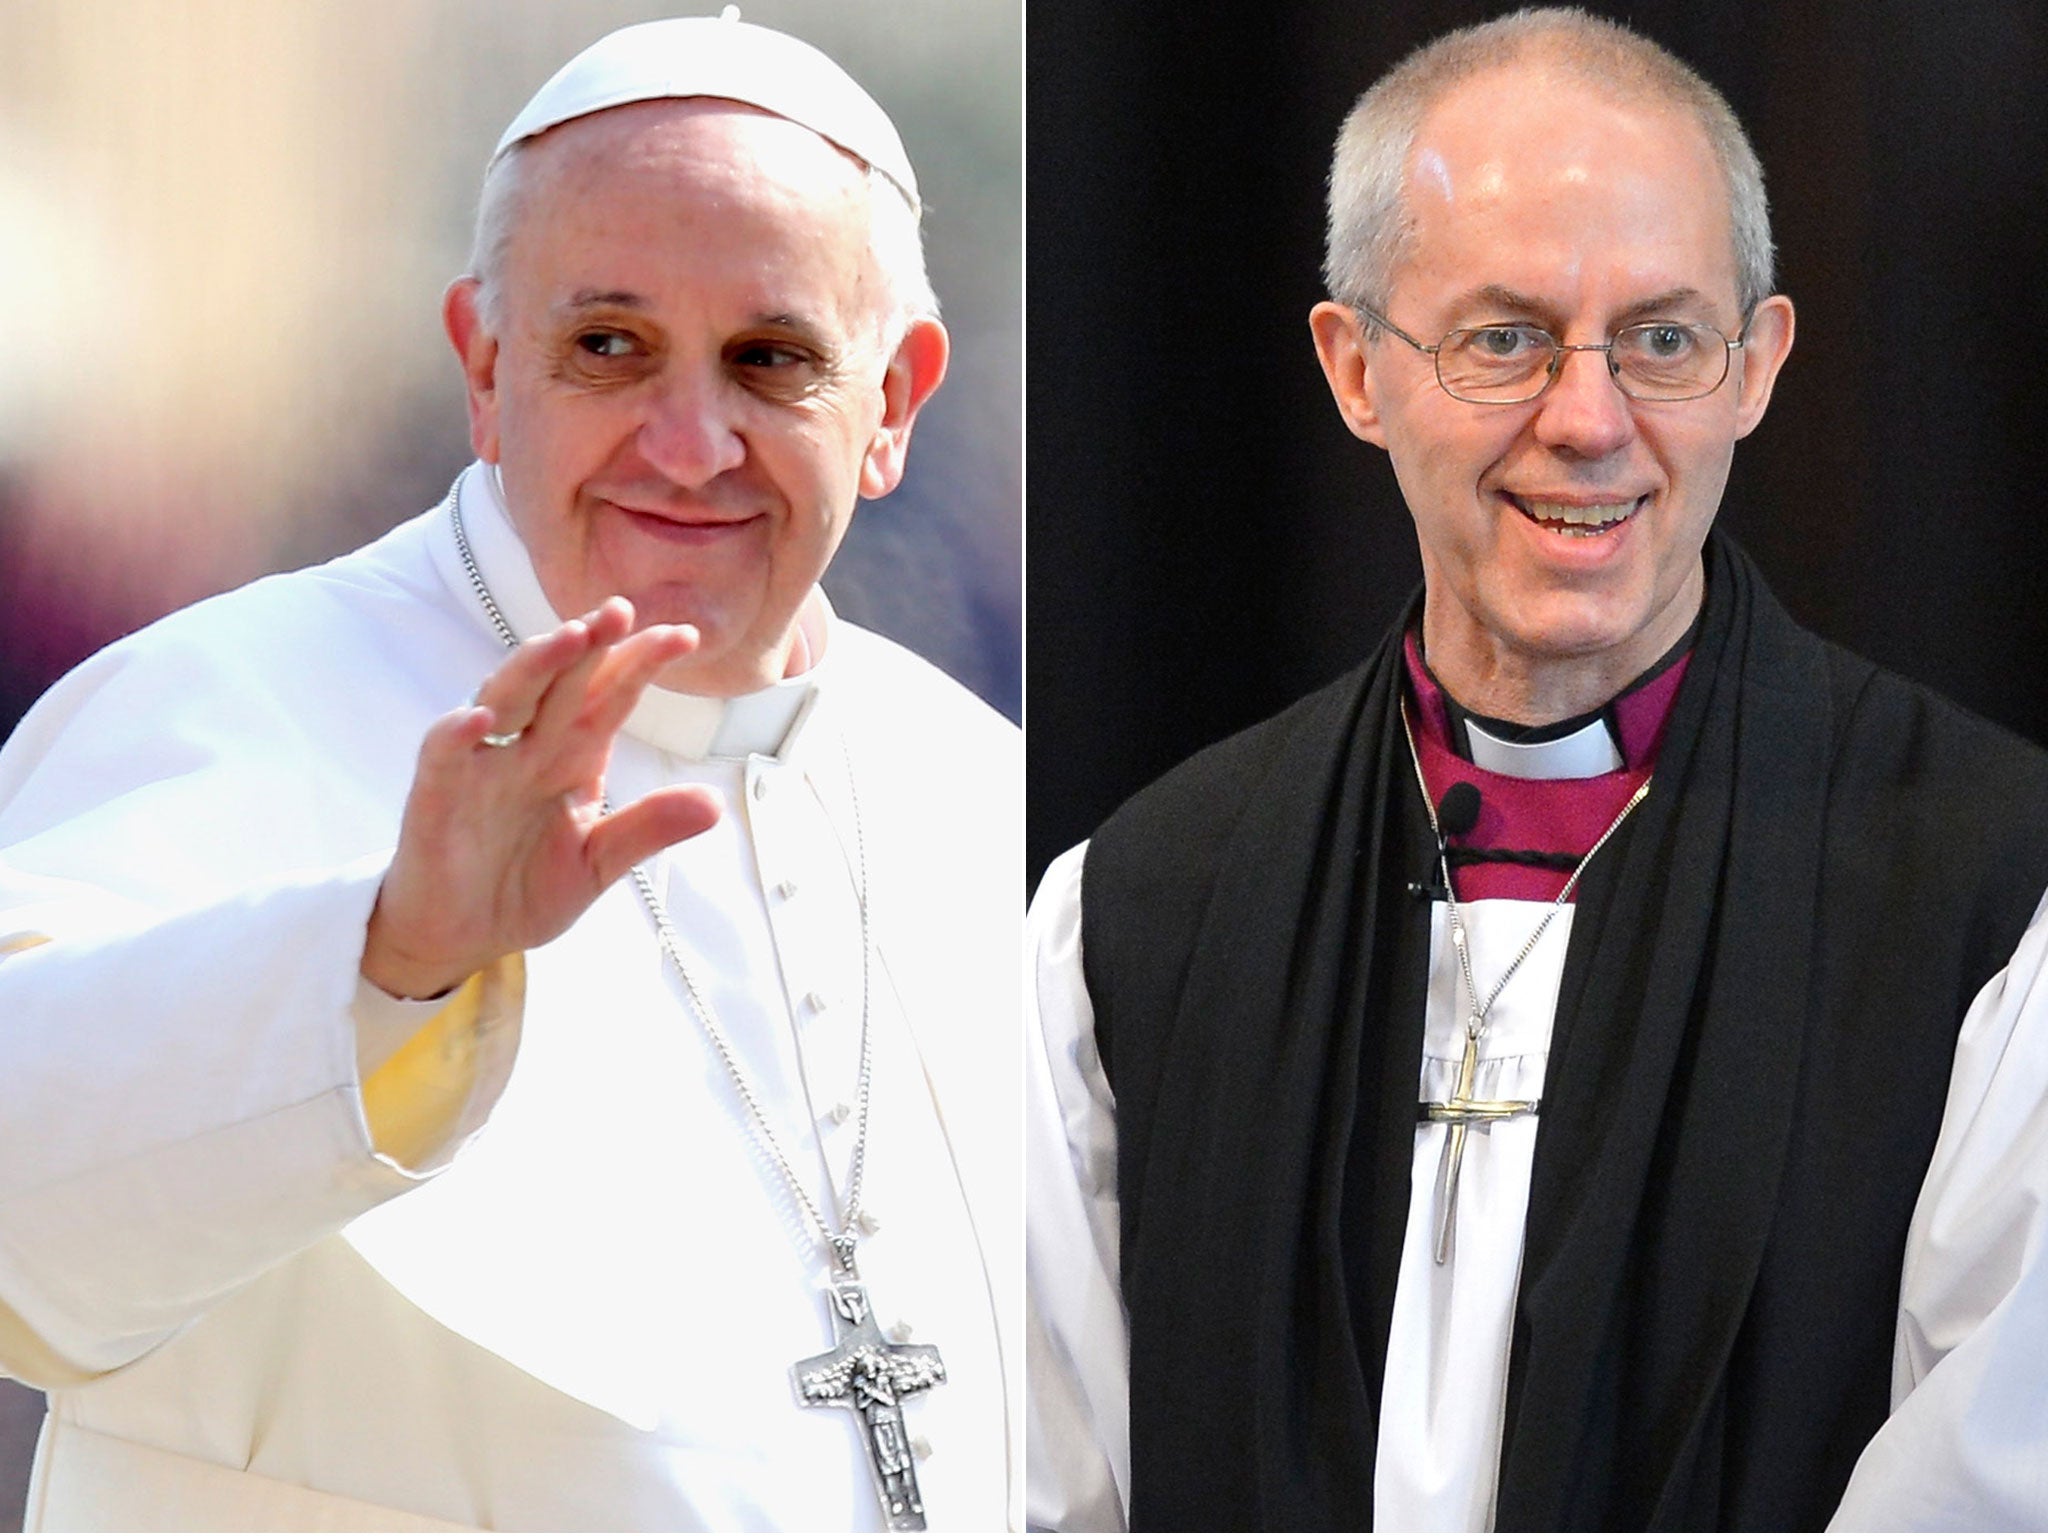 Pope Francis (left) will meet the Archbishop of Canterbury, Justin Welby (right), for the first time this week